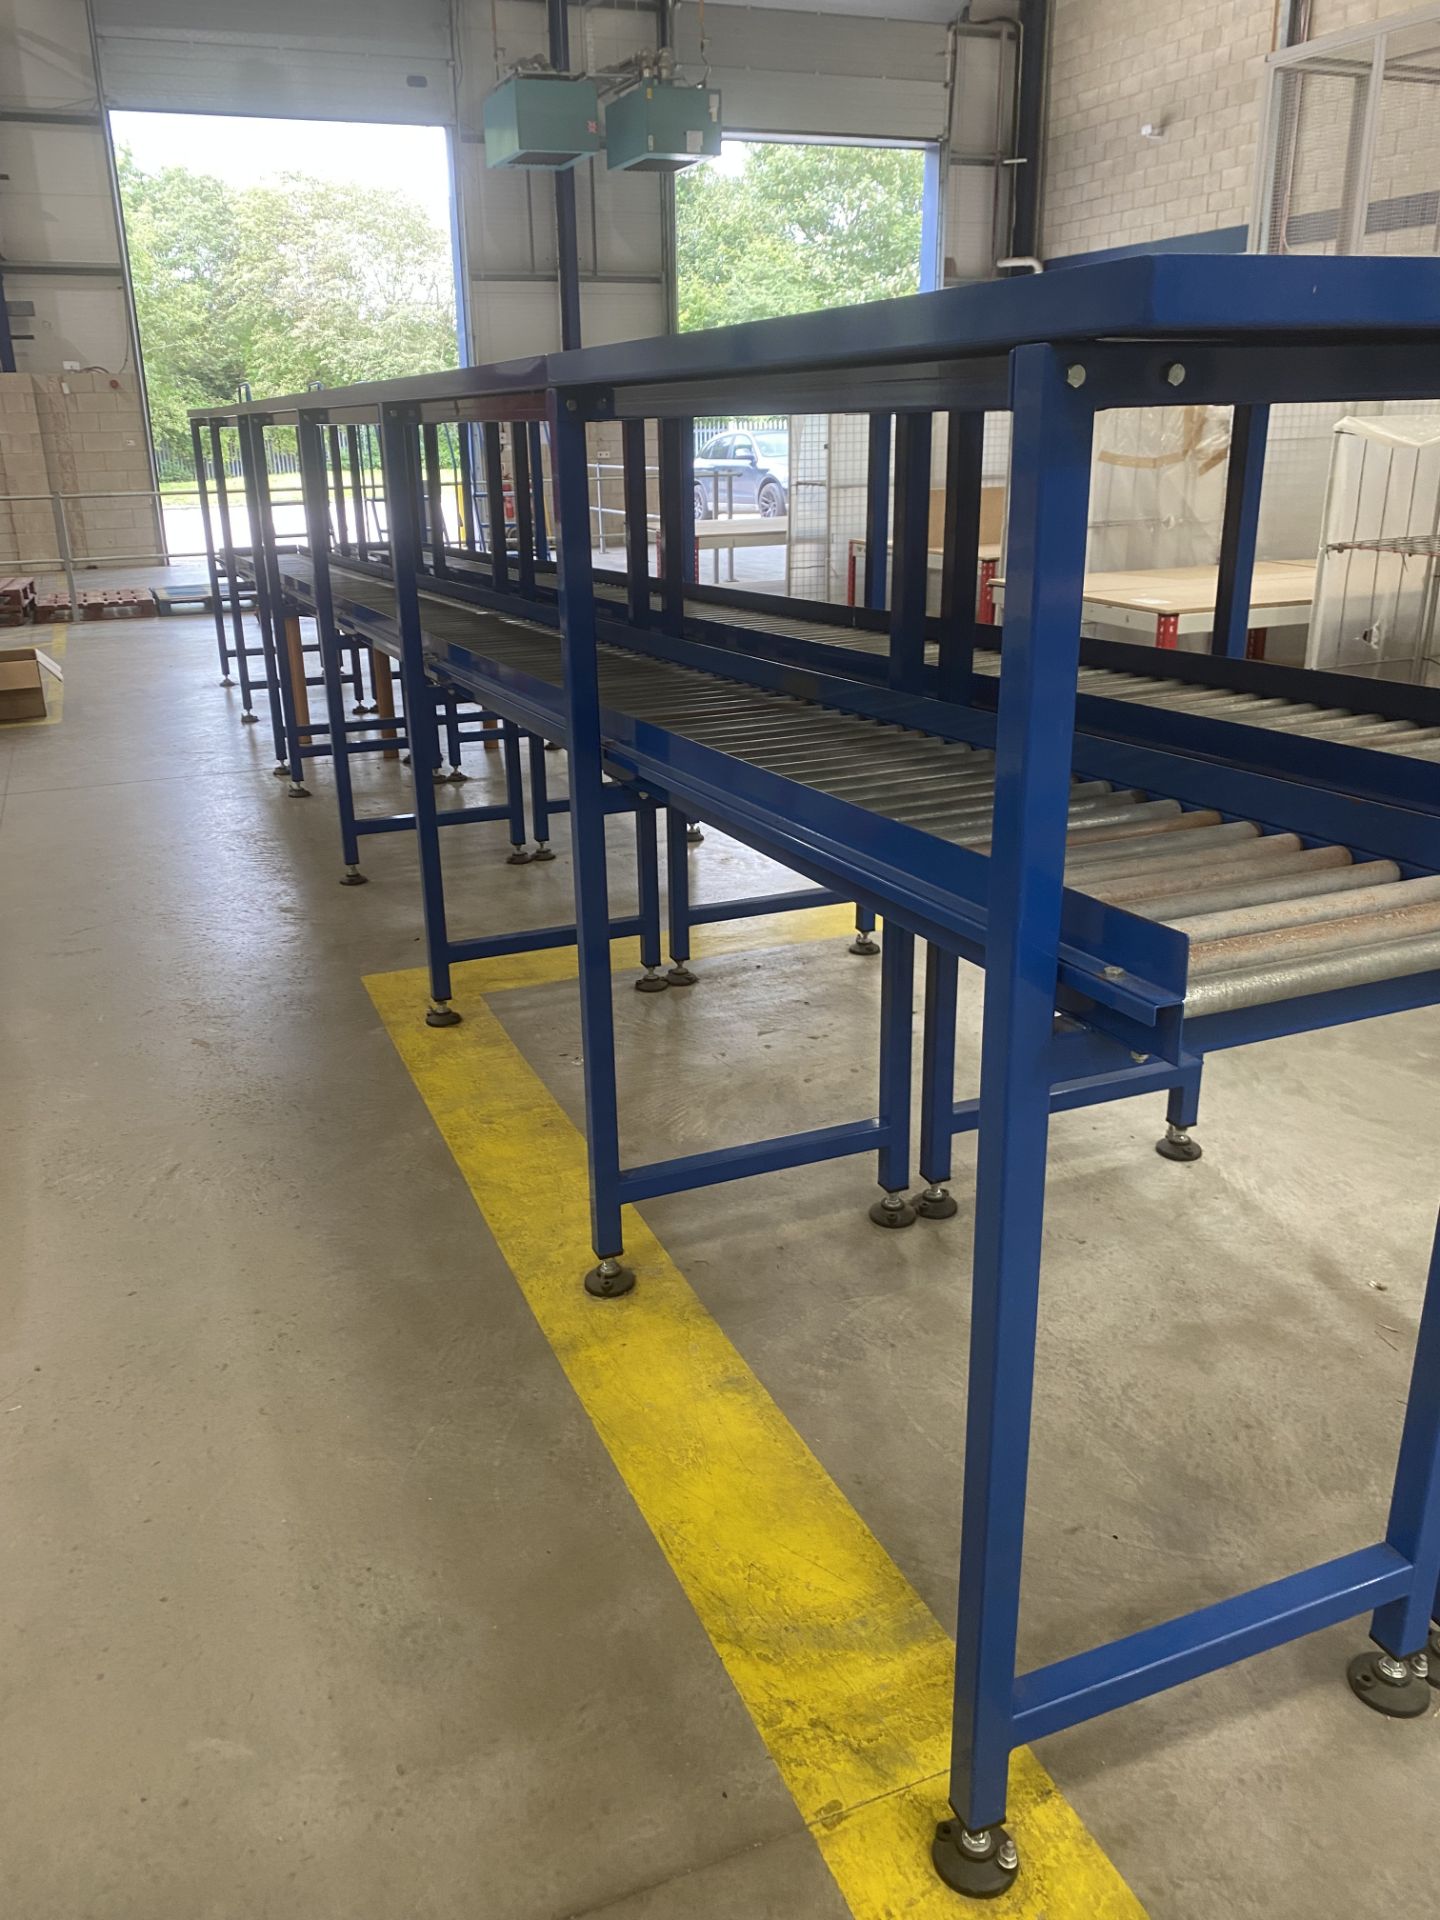 WAREHOUSE ROLLER CONVEYOR SYSTEM WITH TOP SHELF STORAGE 9.5M (3 SECTIONS OF 3M - CAN BE DISMANTLED) - Image 3 of 5